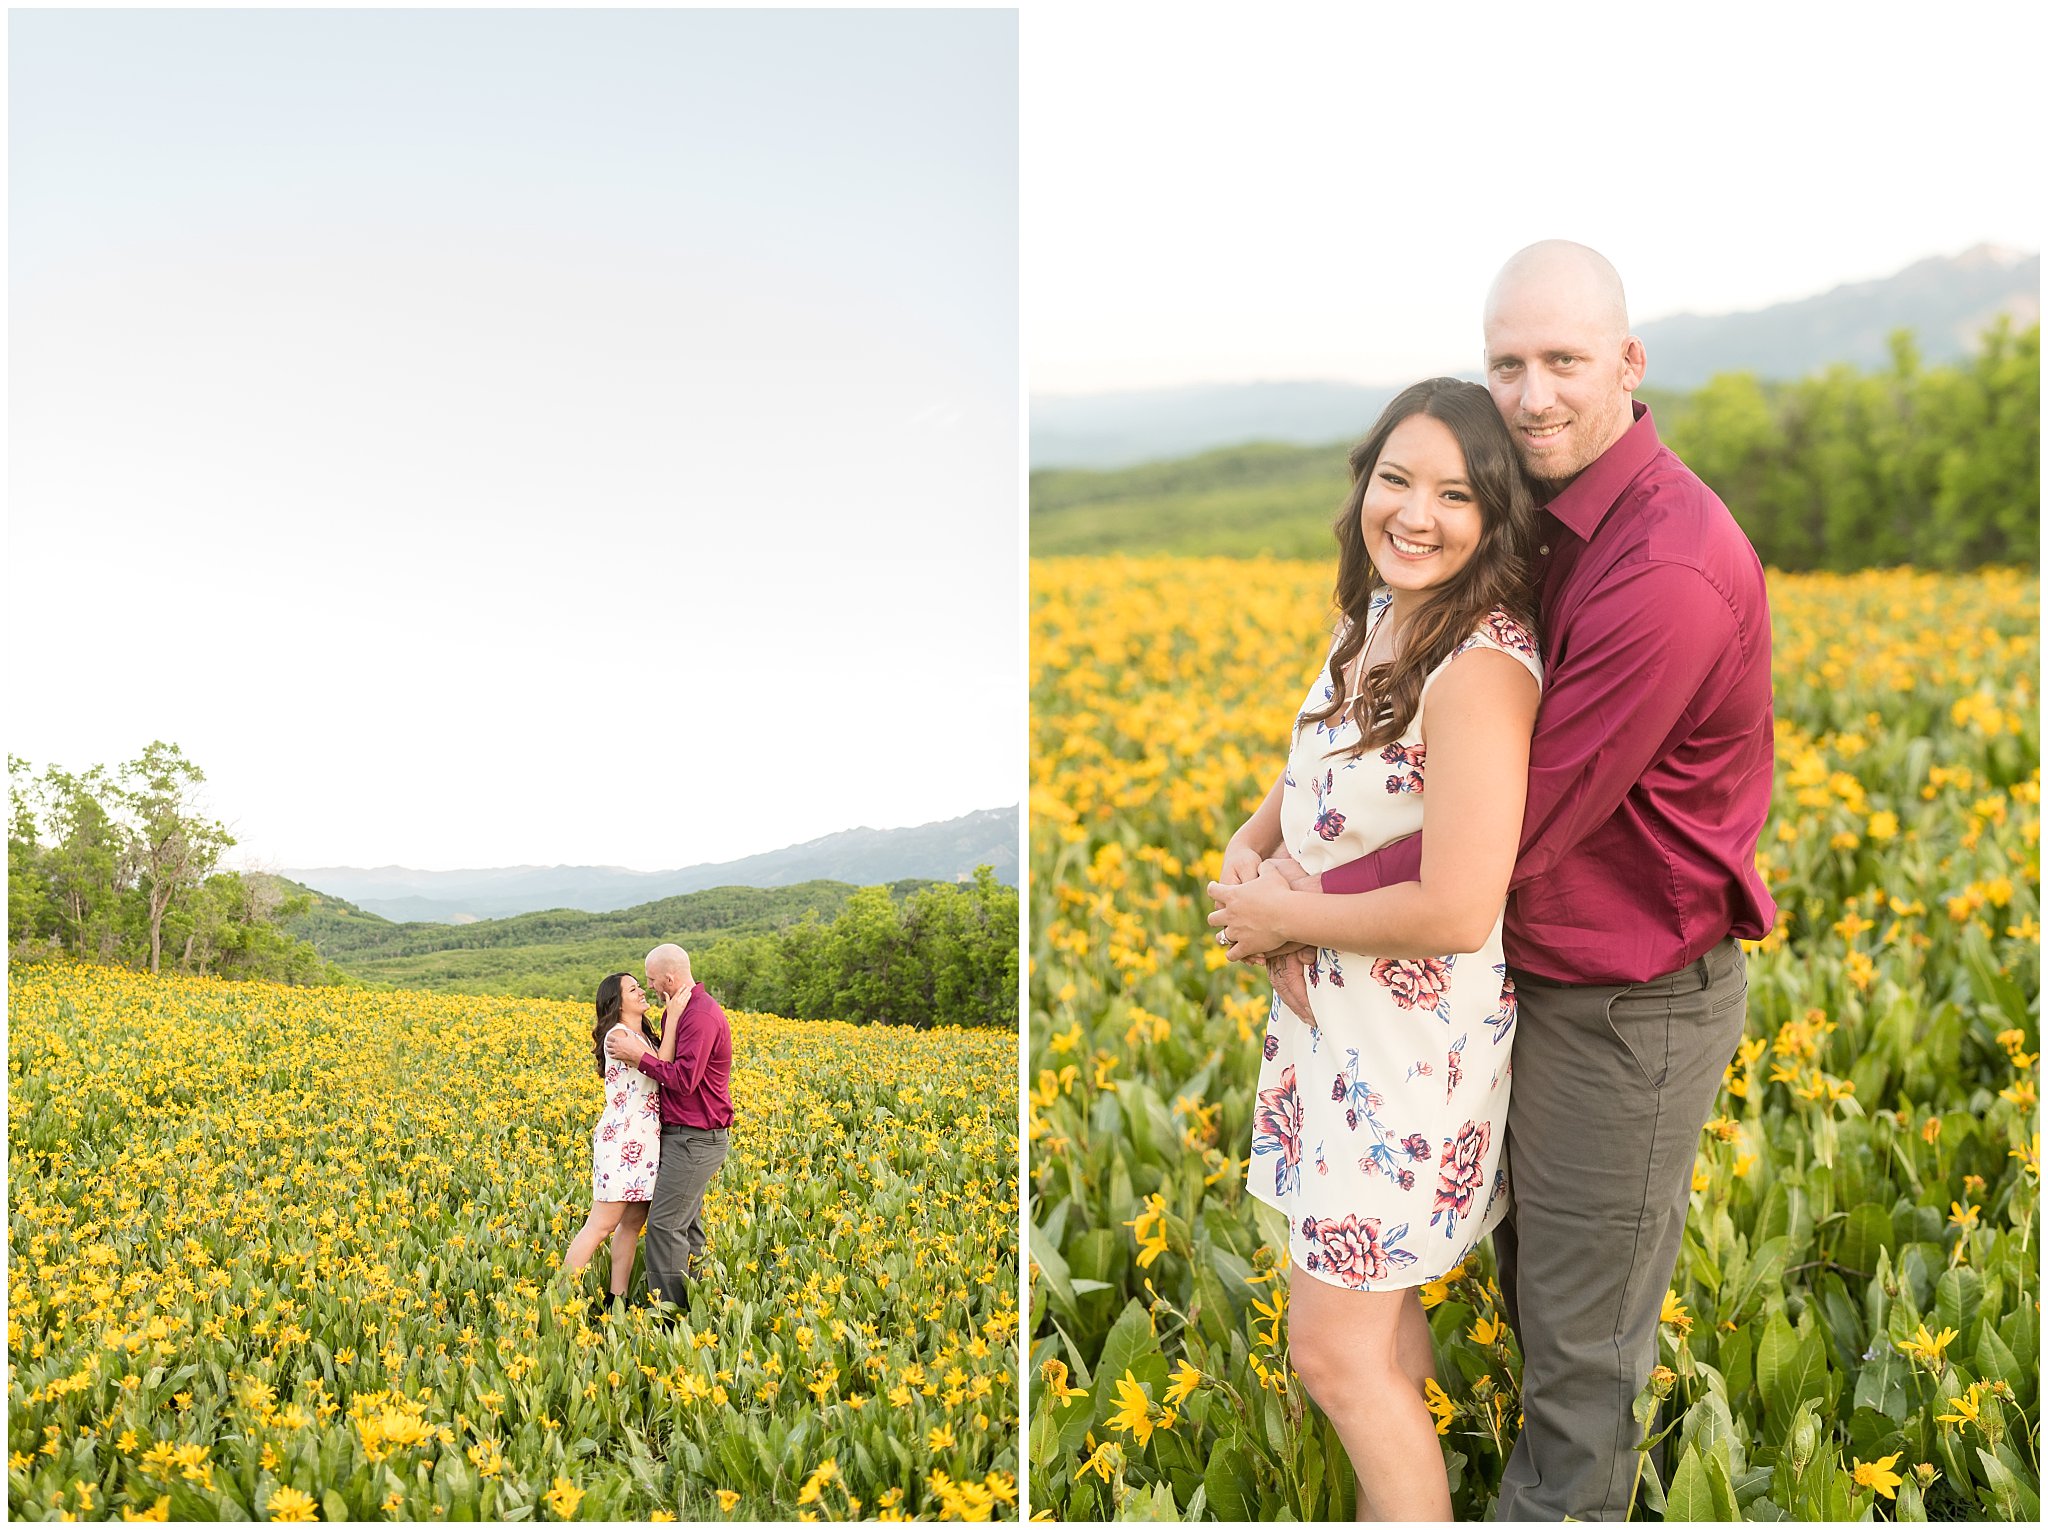 Couple during engagement session in the mountains with wildflowers | Snowbasin Utah Engagements